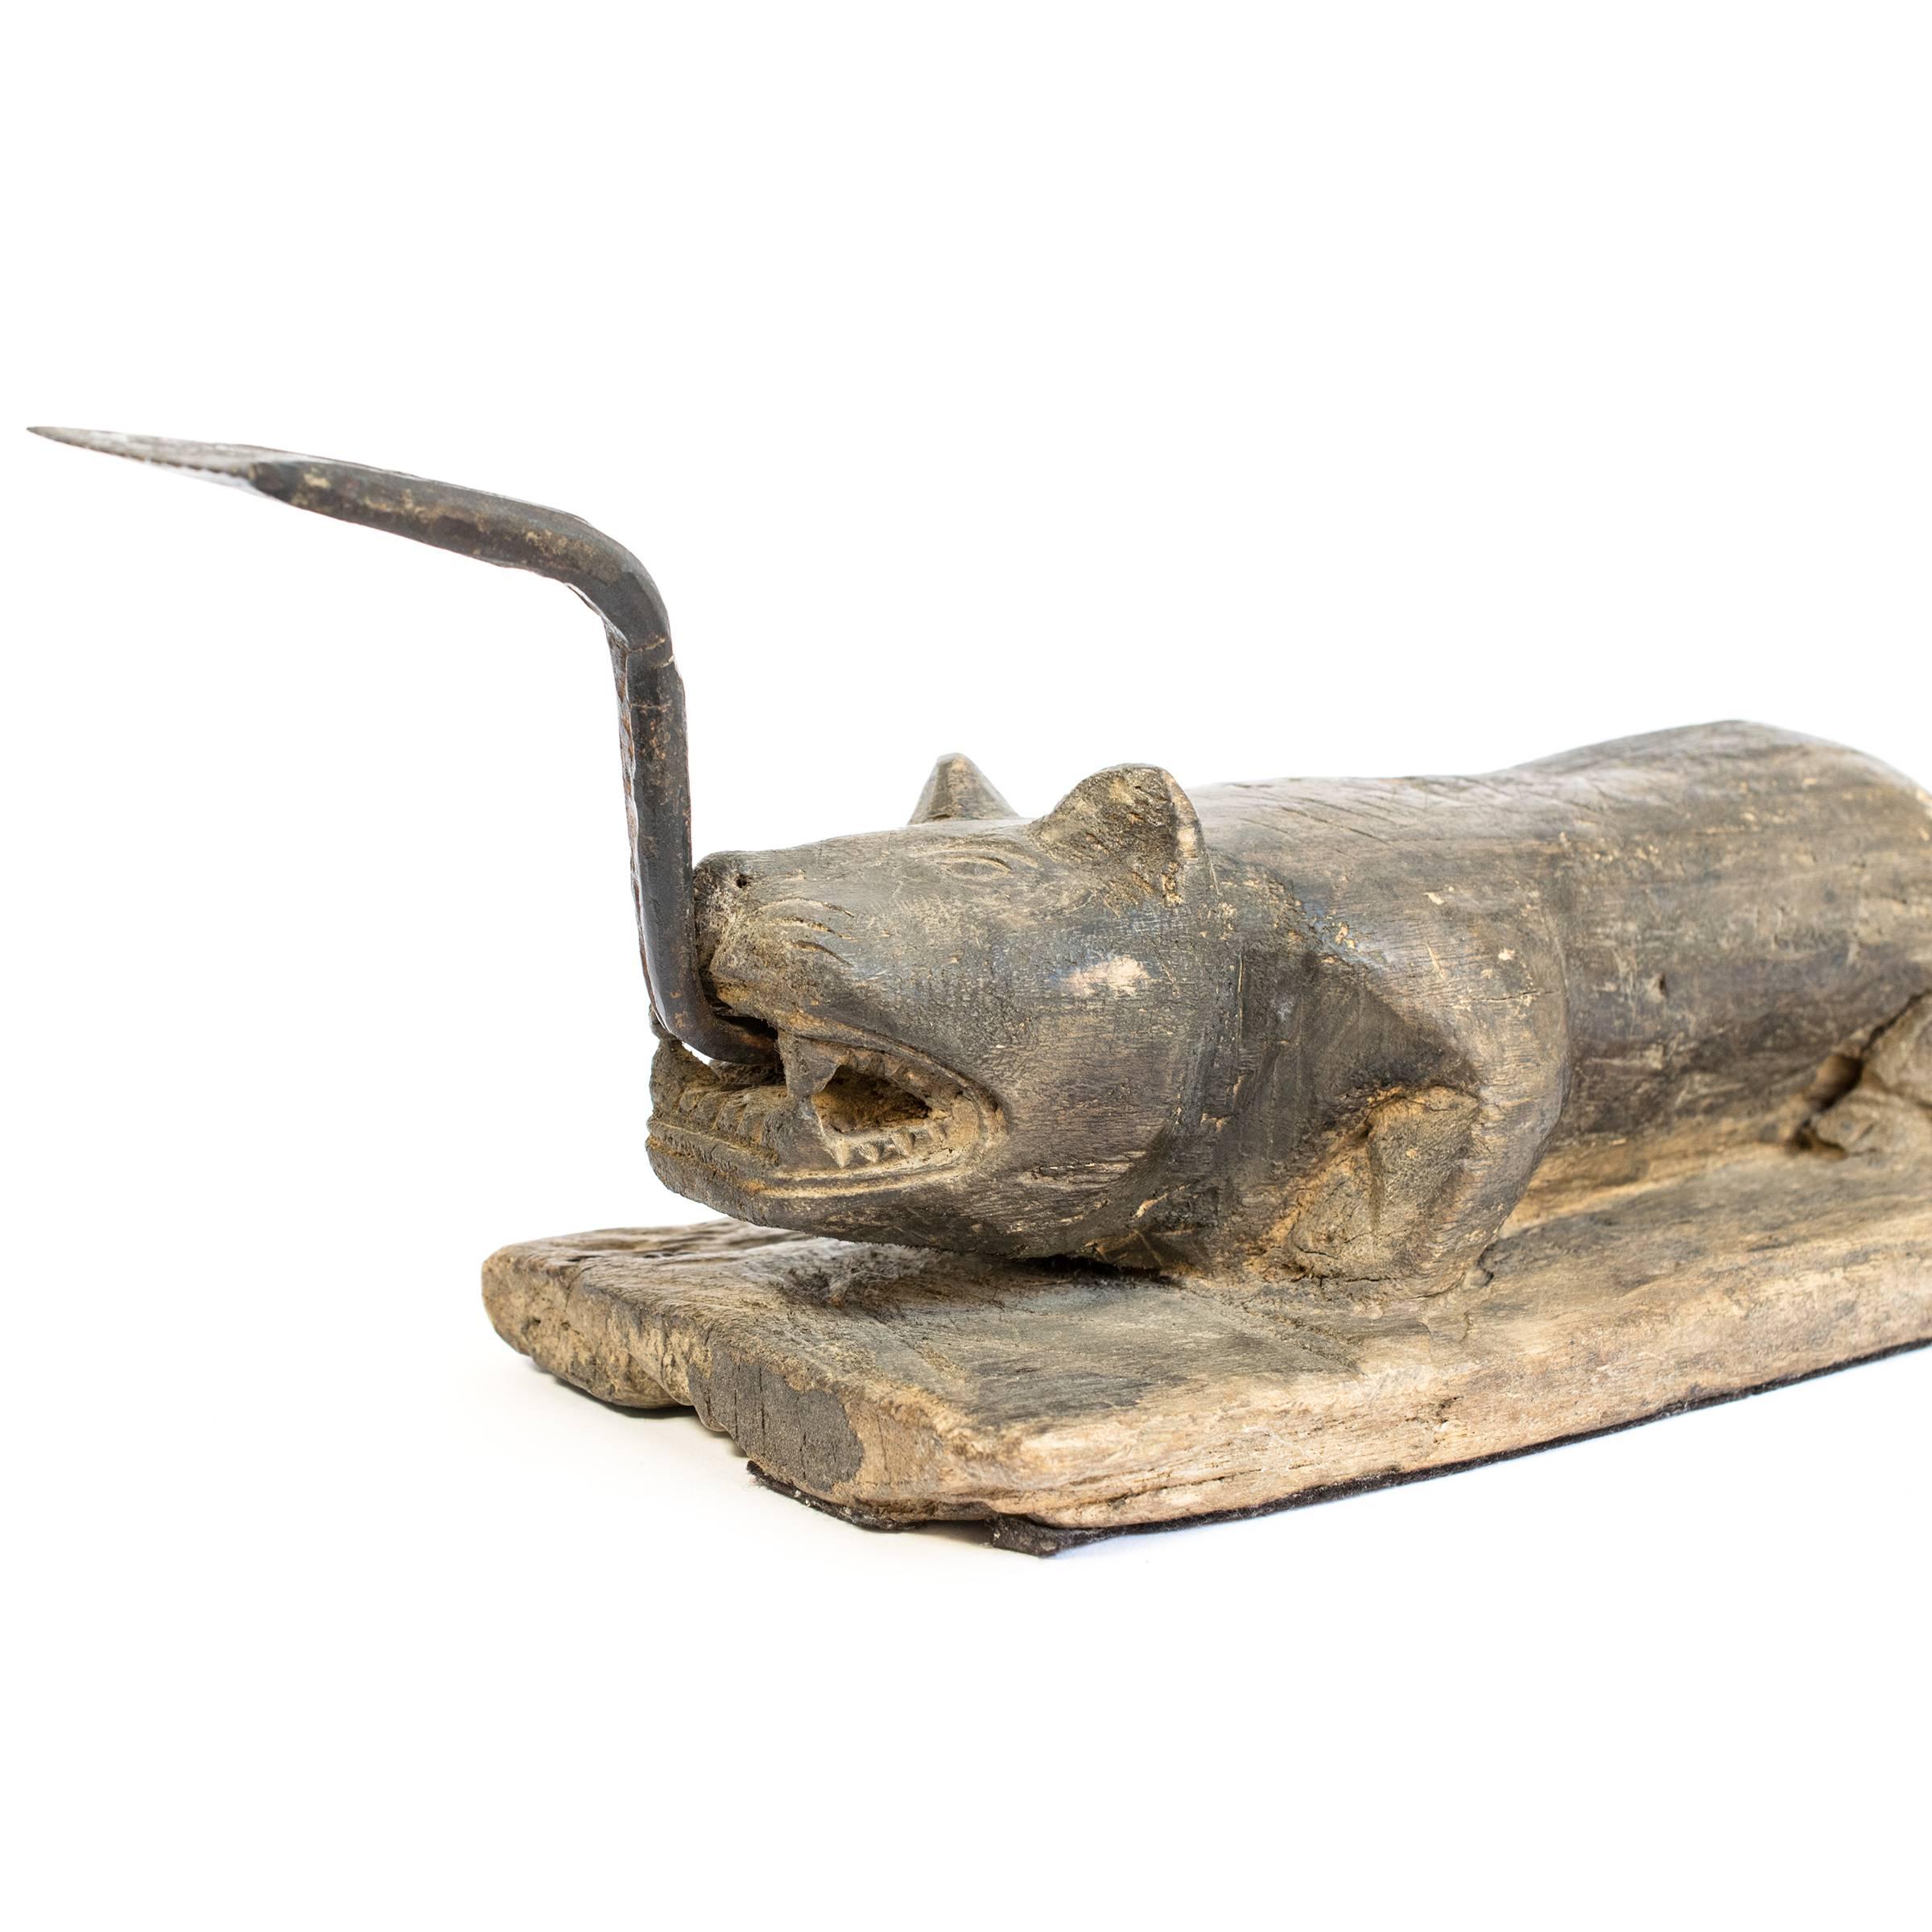 This sculptural early 20th century coconut splitter was carved into the form of a crouching beast ready to pounce. It was likely a merchant's tool in a South East Asian market used to split coconuts which were then ground into fine snow-like flakes